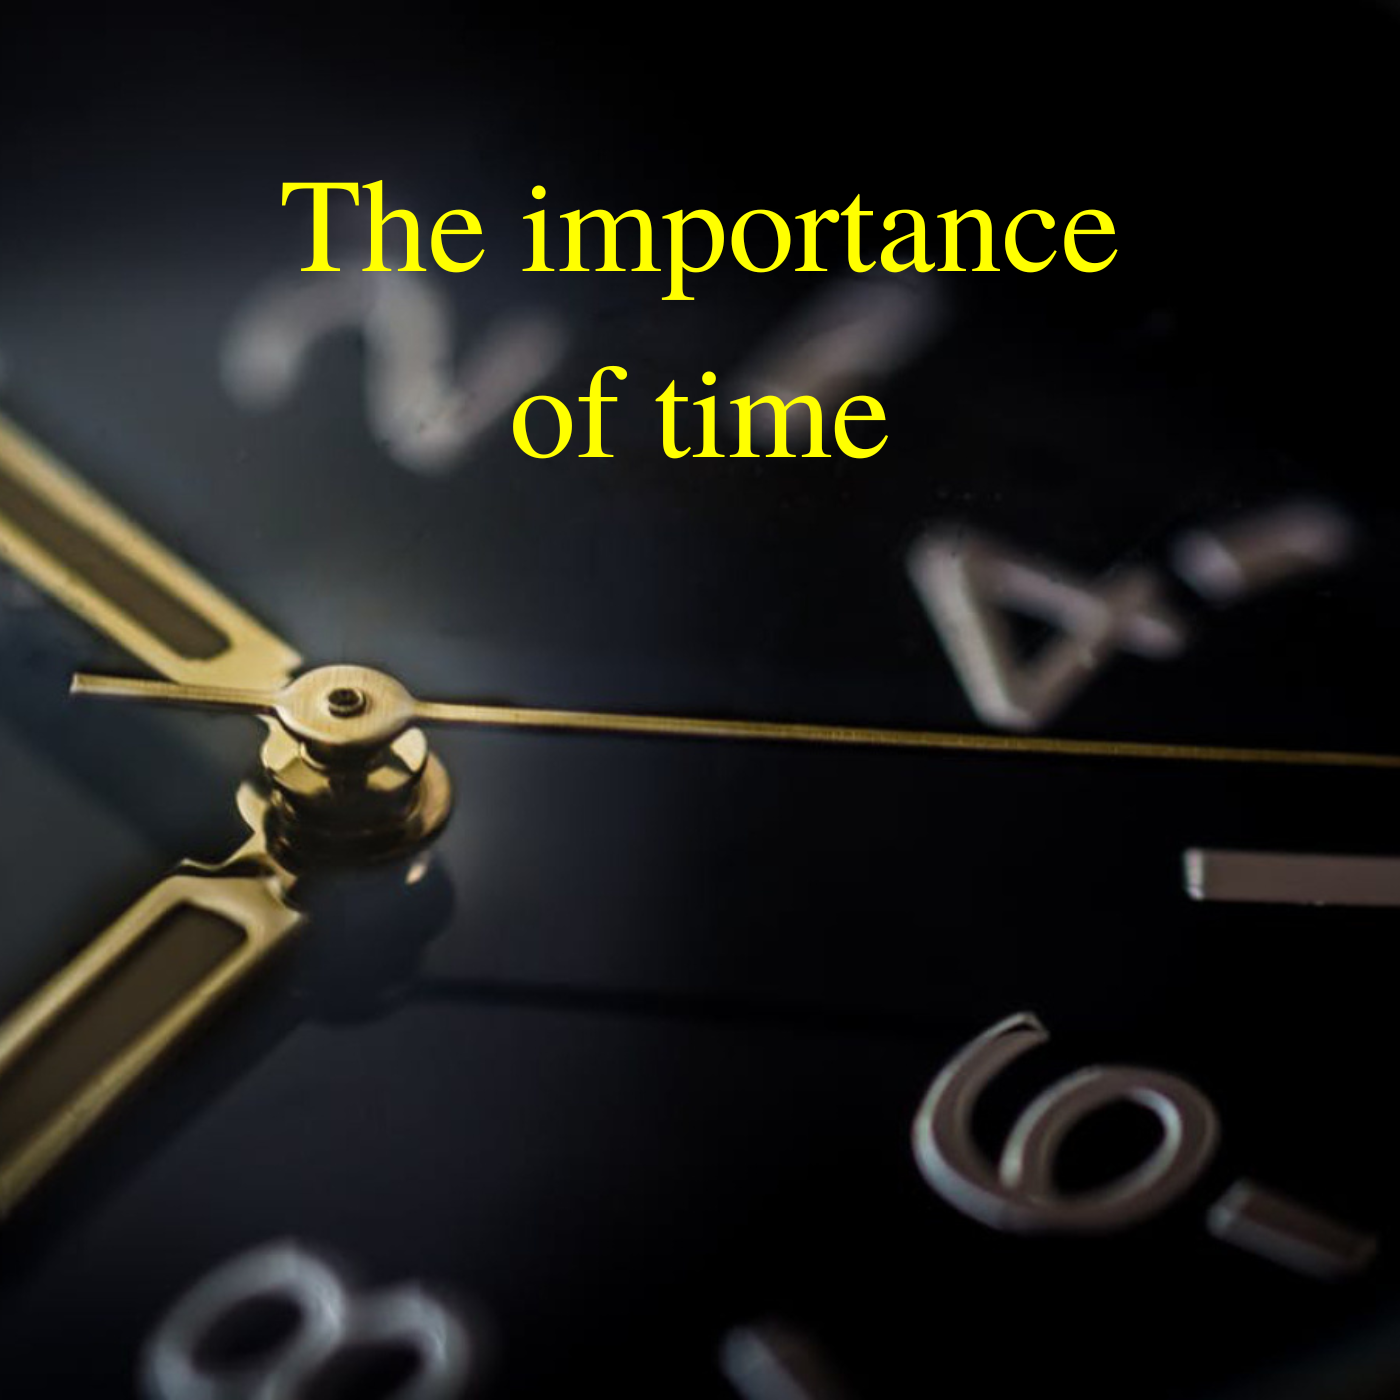 The importance of time